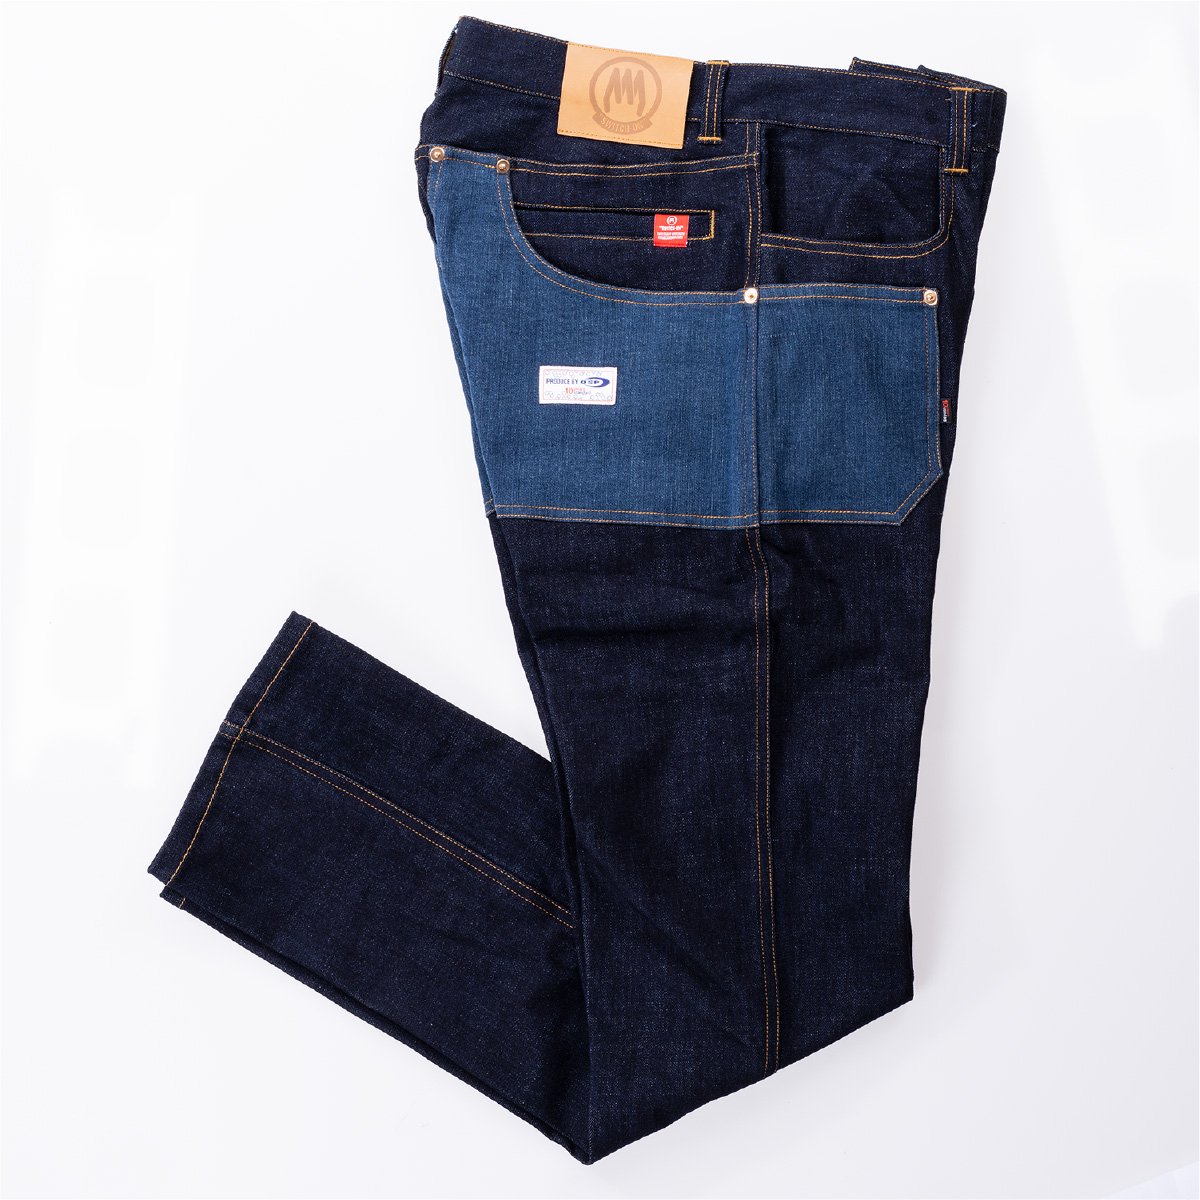 Ez BP STRAIGHT JEANS<img class='new_mark_img2' src='https://img.shop-pro.jp/img/new/icons62.gif' style='border:none;display:inline;margin:0px;padding:0px;width:auto;' />